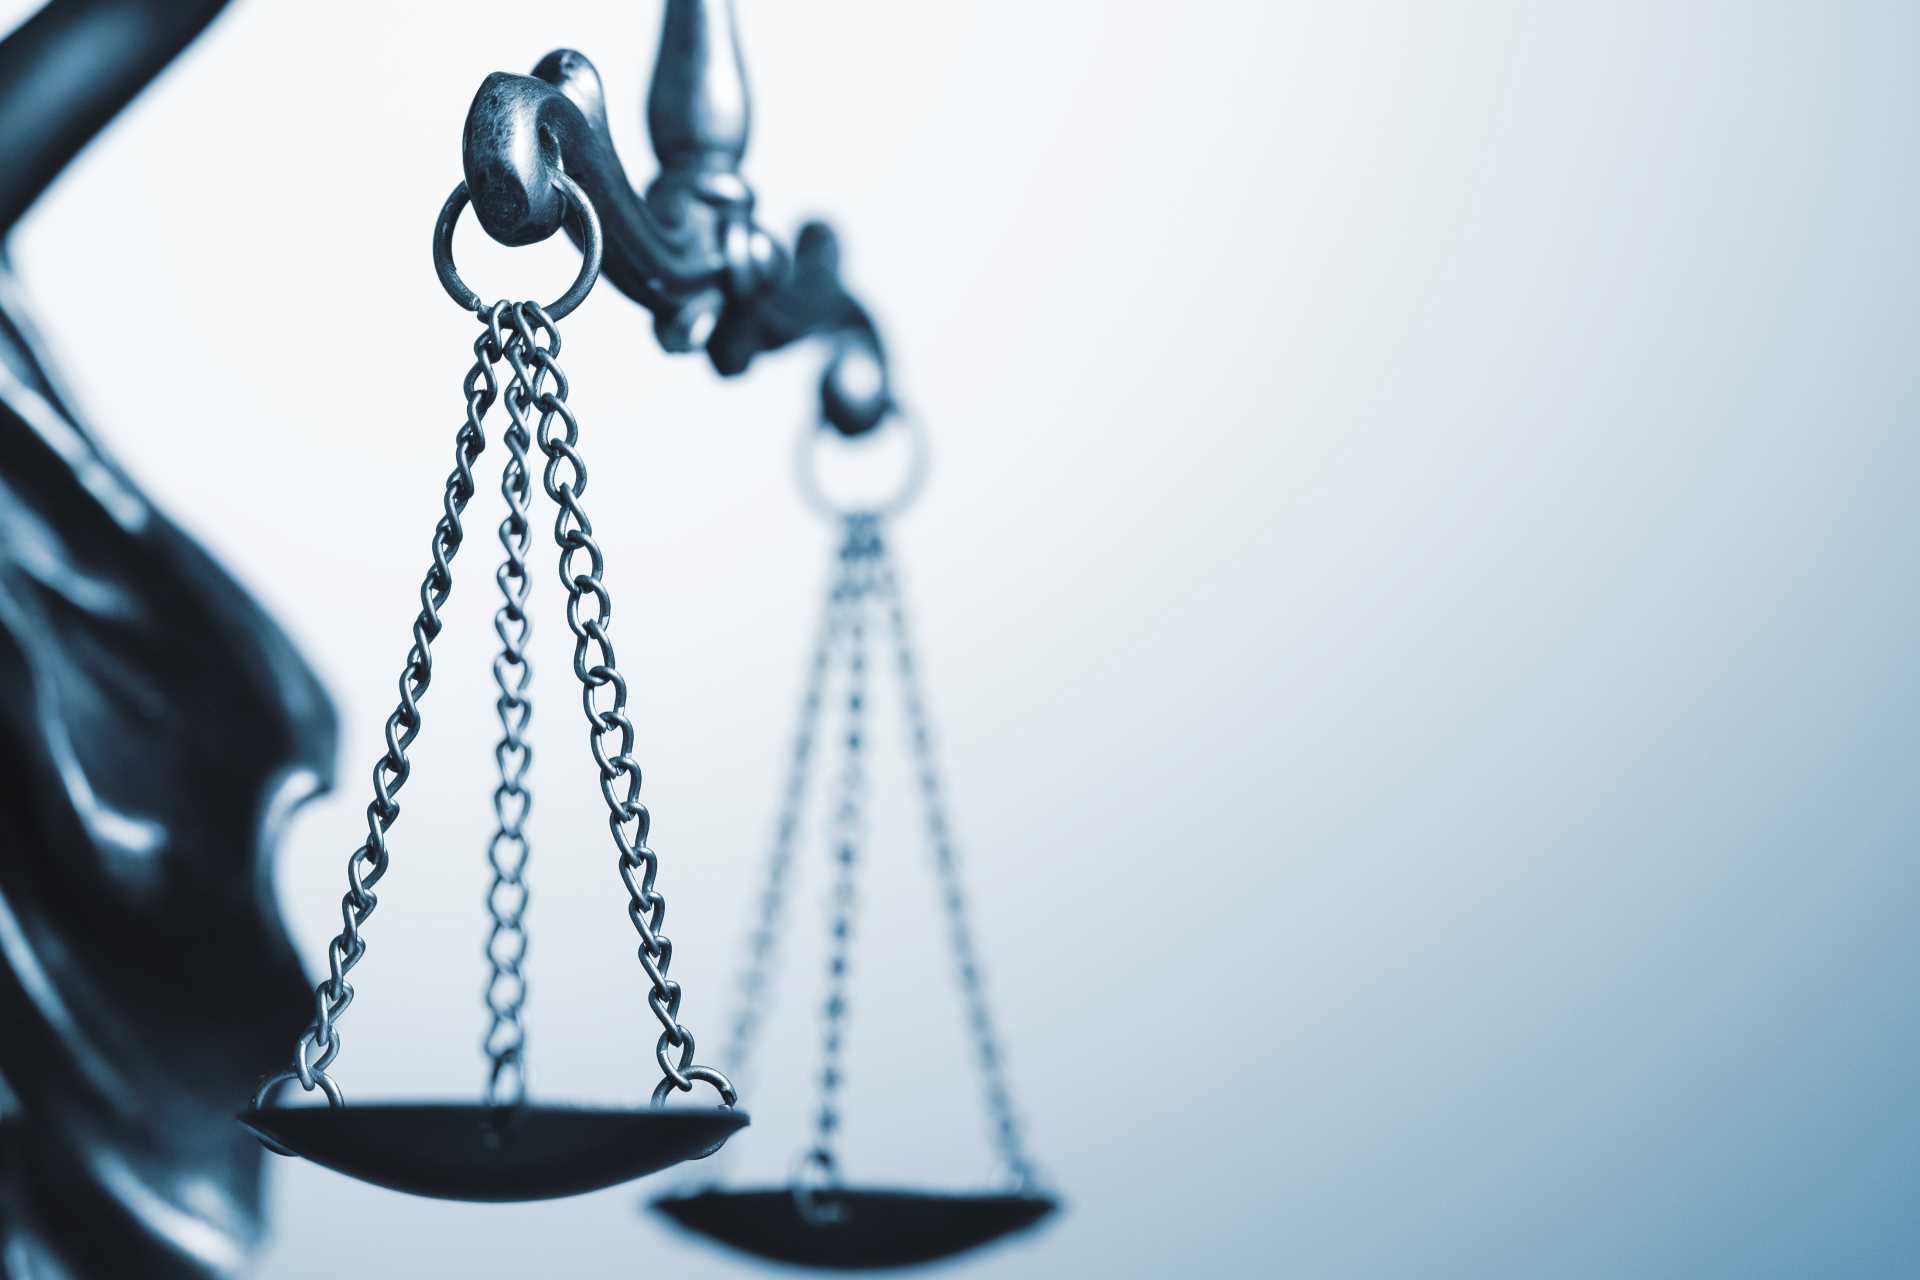 Close up photo of the scales of justice | Featured Image for the General Protections Claim Blog by Bramwell Partners.